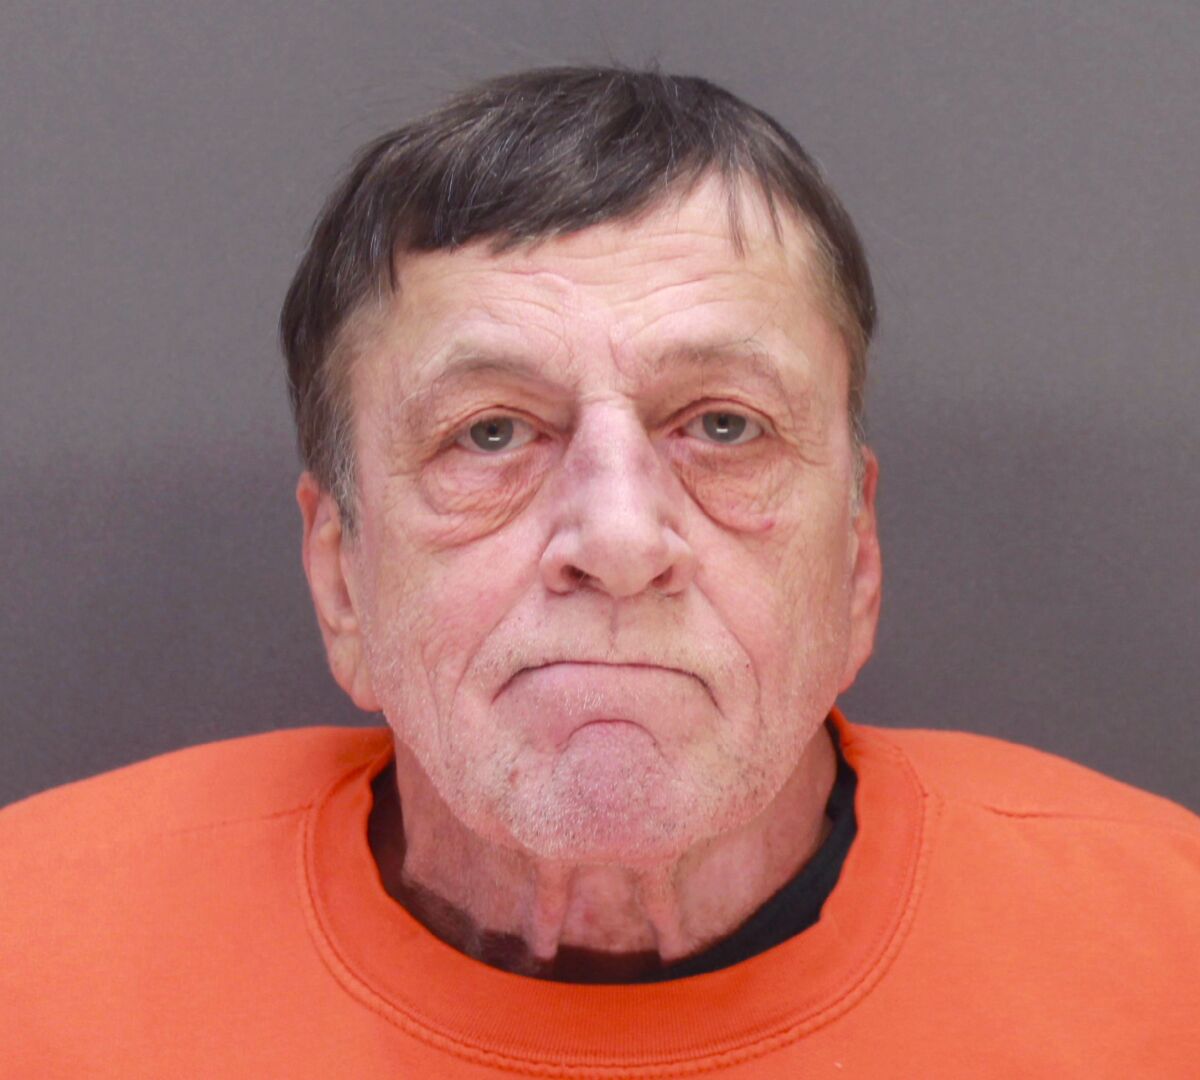 FILE - This booking photo released by the Wright County, Minn., Sheriff's Office shows Gregory Paul Ulrich. Ulrich, 68, will stand trial beginning May 16, 2022, on charges of murder, attempted murder and other counts in the Feb. 9 shooting at the Allina Health Clinic in Buffalo, a small city about 40 miles (65 kilometers) northwest of Minneapolis. (Wright County Sheriff's Office via AP, File)